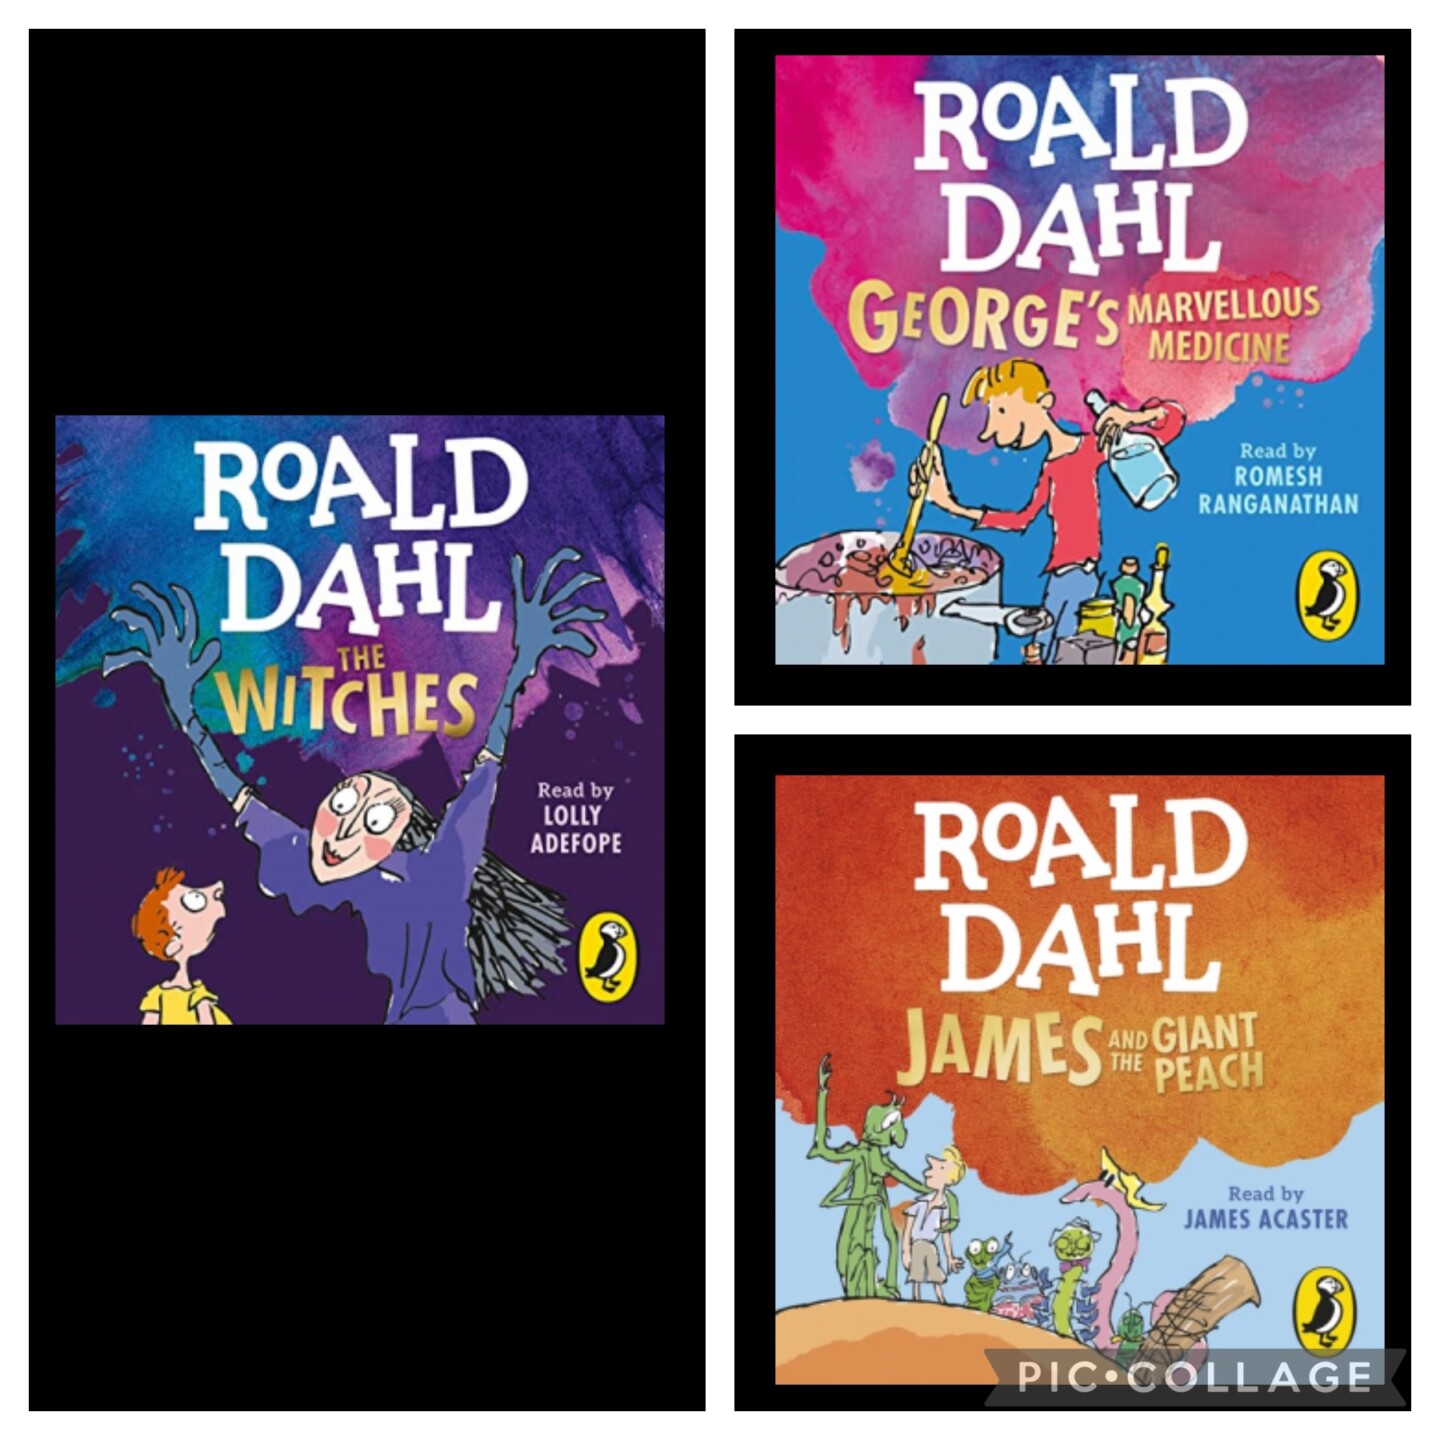 Roald Dahl’s James and the Giant Peach, read by James Acaster, The Witches, read by Lolly Adefope and George’s Marvellous Medicine, read by Romesh Ranganathan -Penguin RandomHouse UK Audio